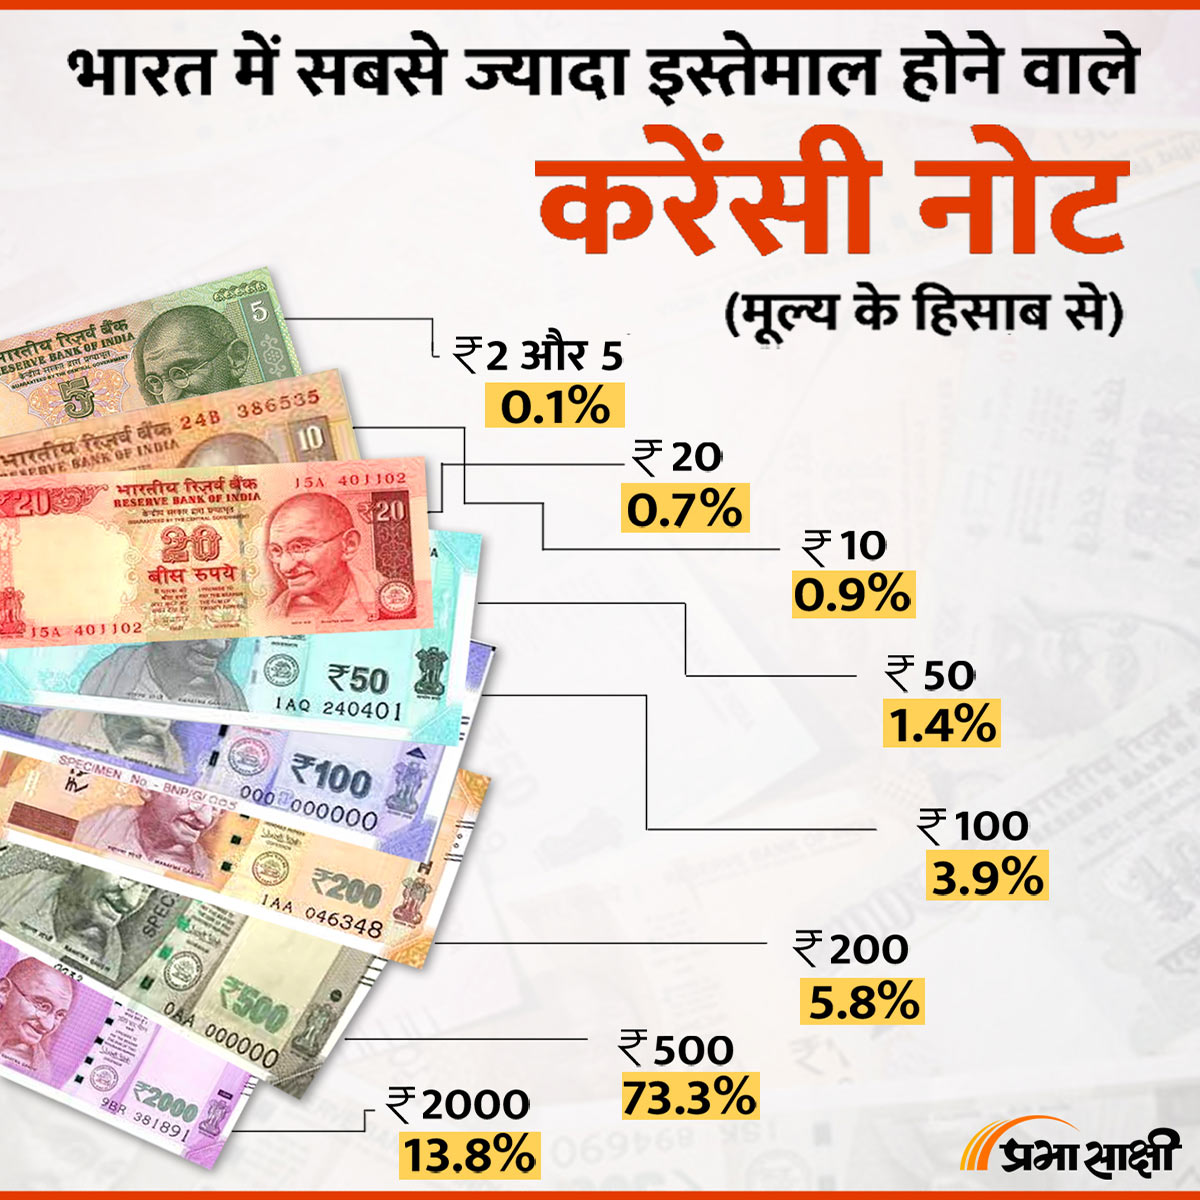 Most used currency notes in India